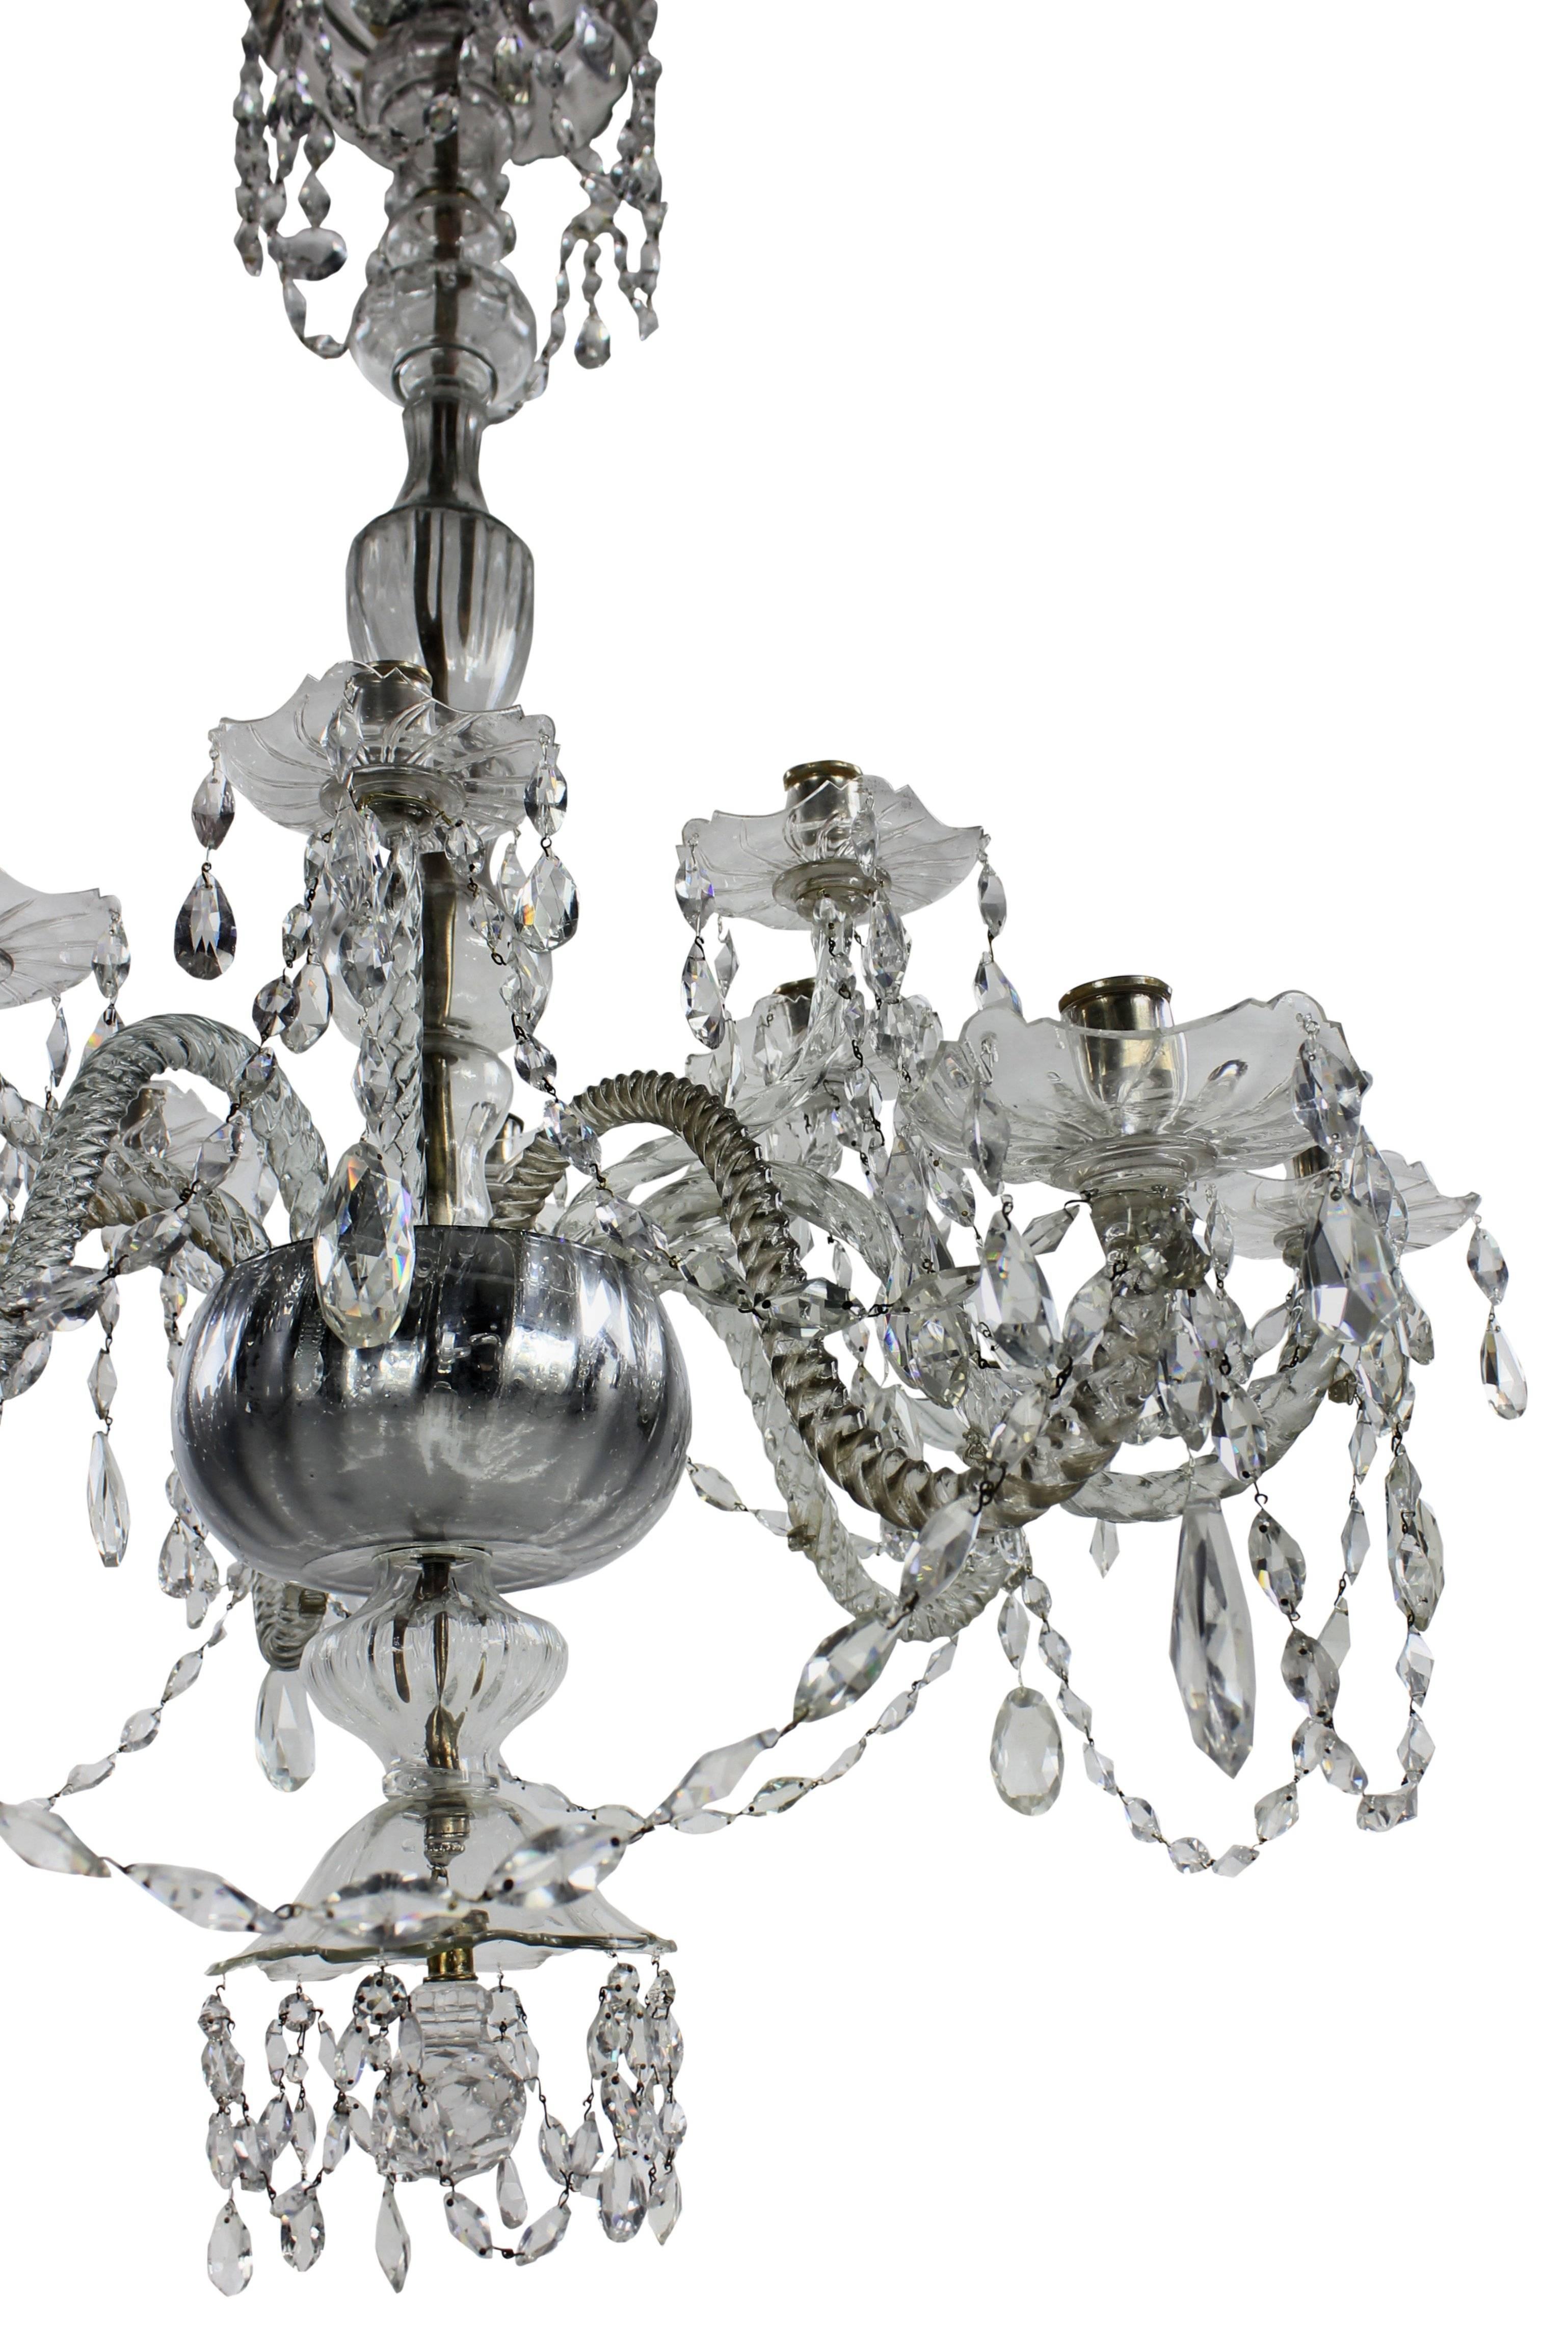 An early 19th century cut and blown glass Venetian chandelier of large proportions. With barley twist arms, molded fluted drip pans, baluster, swags and lemon cut drops. With canopy and silvered receiver dish. With six down-swept arms and six